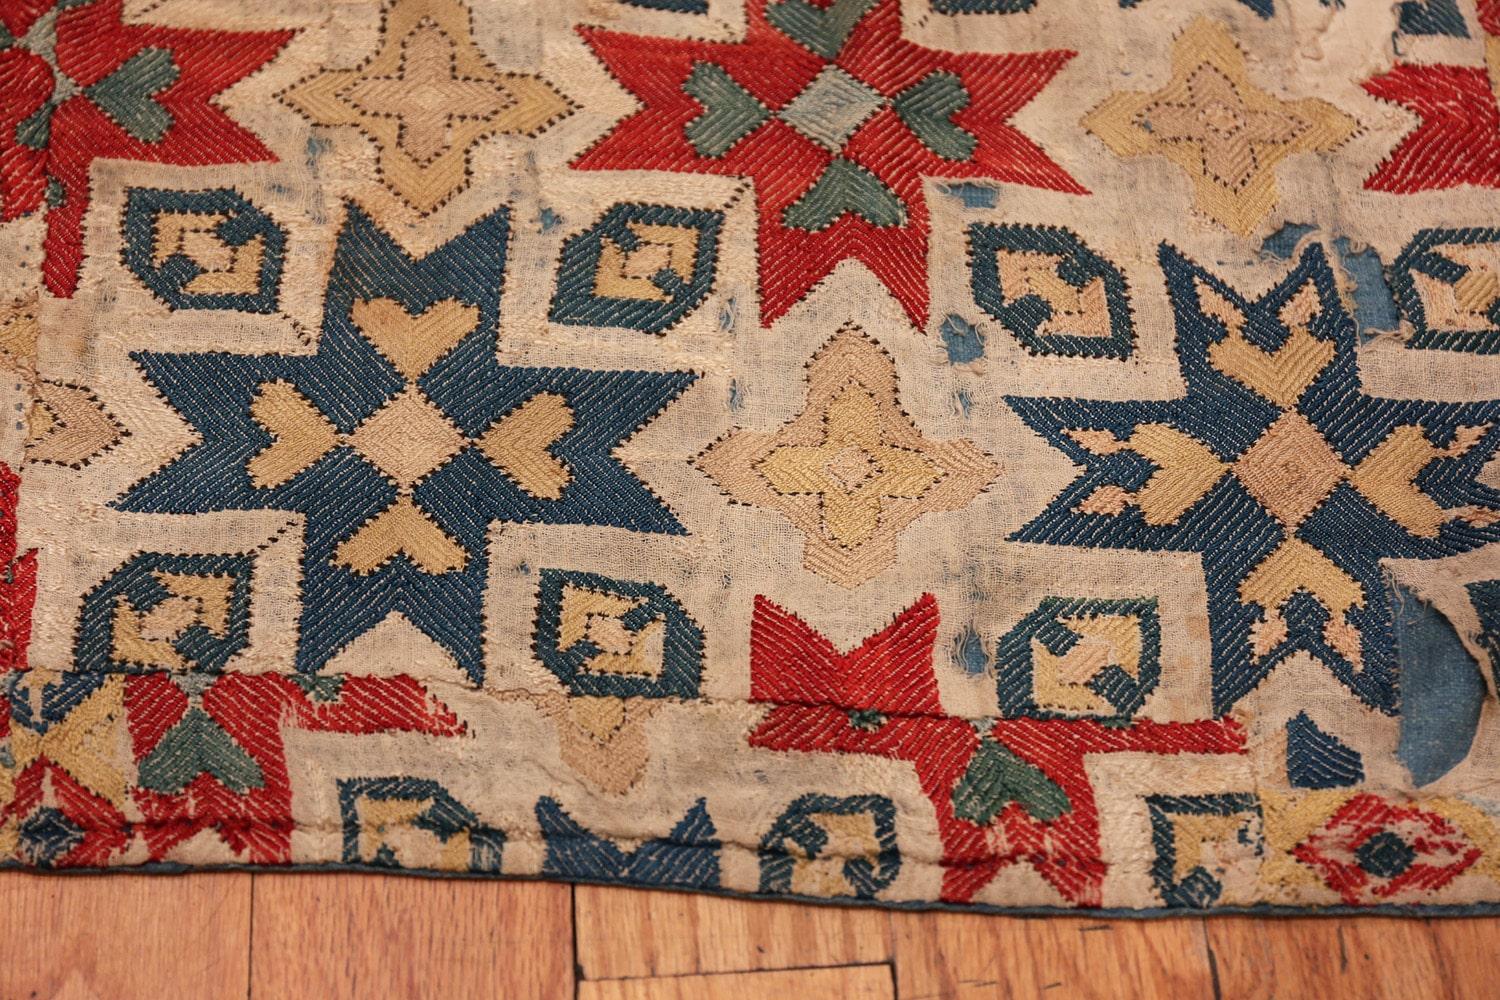 Hand-Knotted Collectible Rare Antique 17th Century Caucasian Kuba Embroidery 3'1